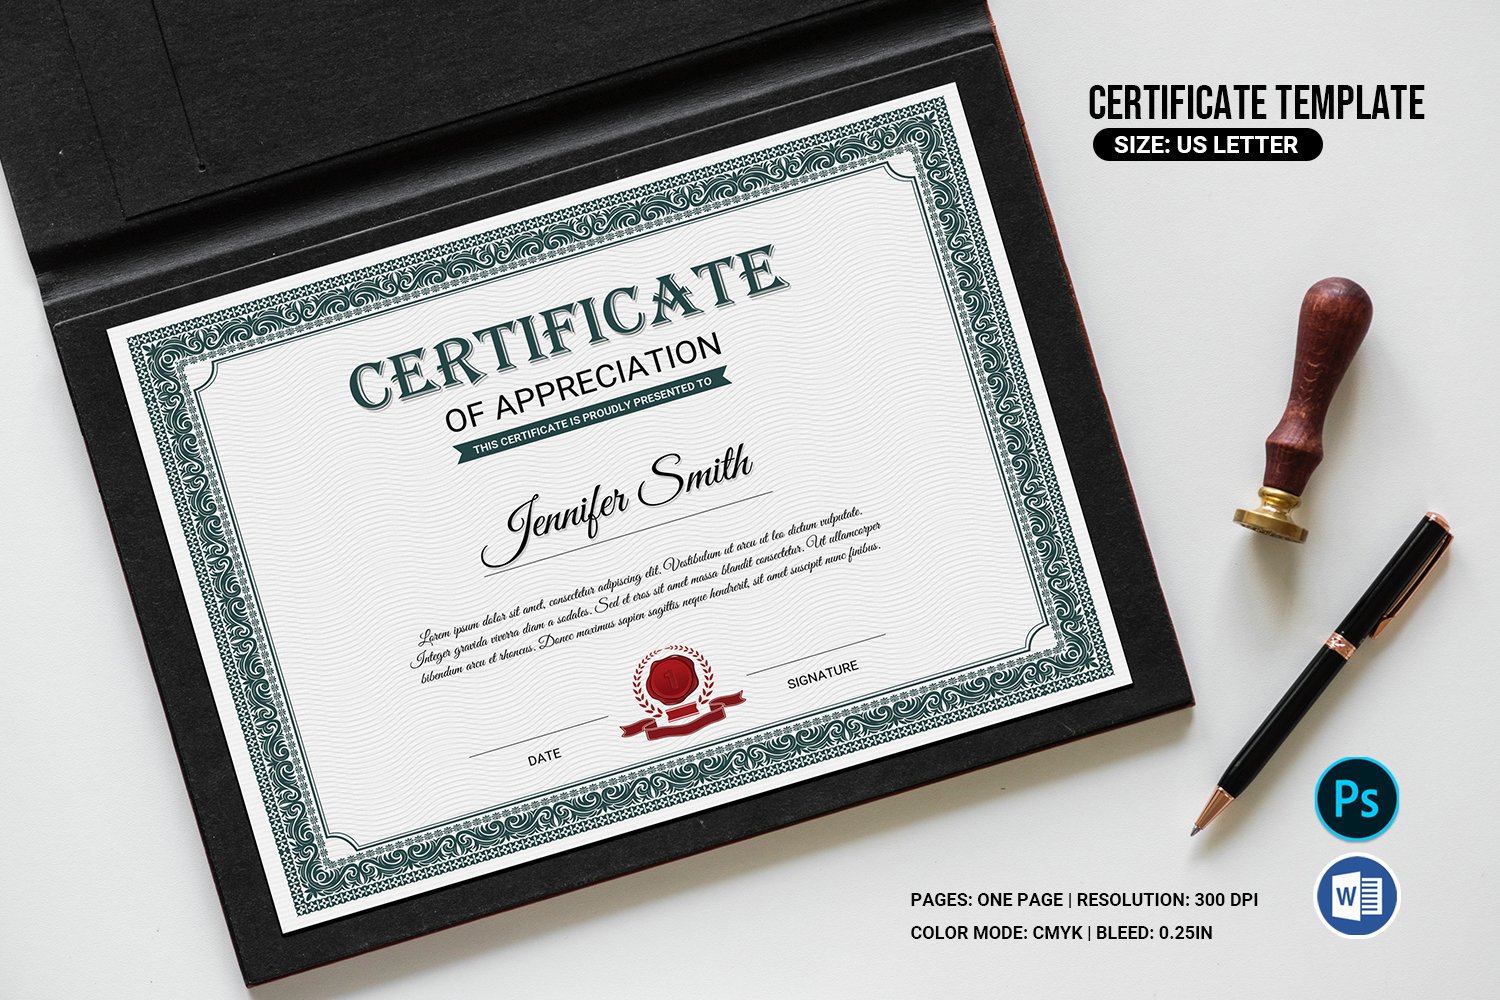 Certificate Template V17 cover image.